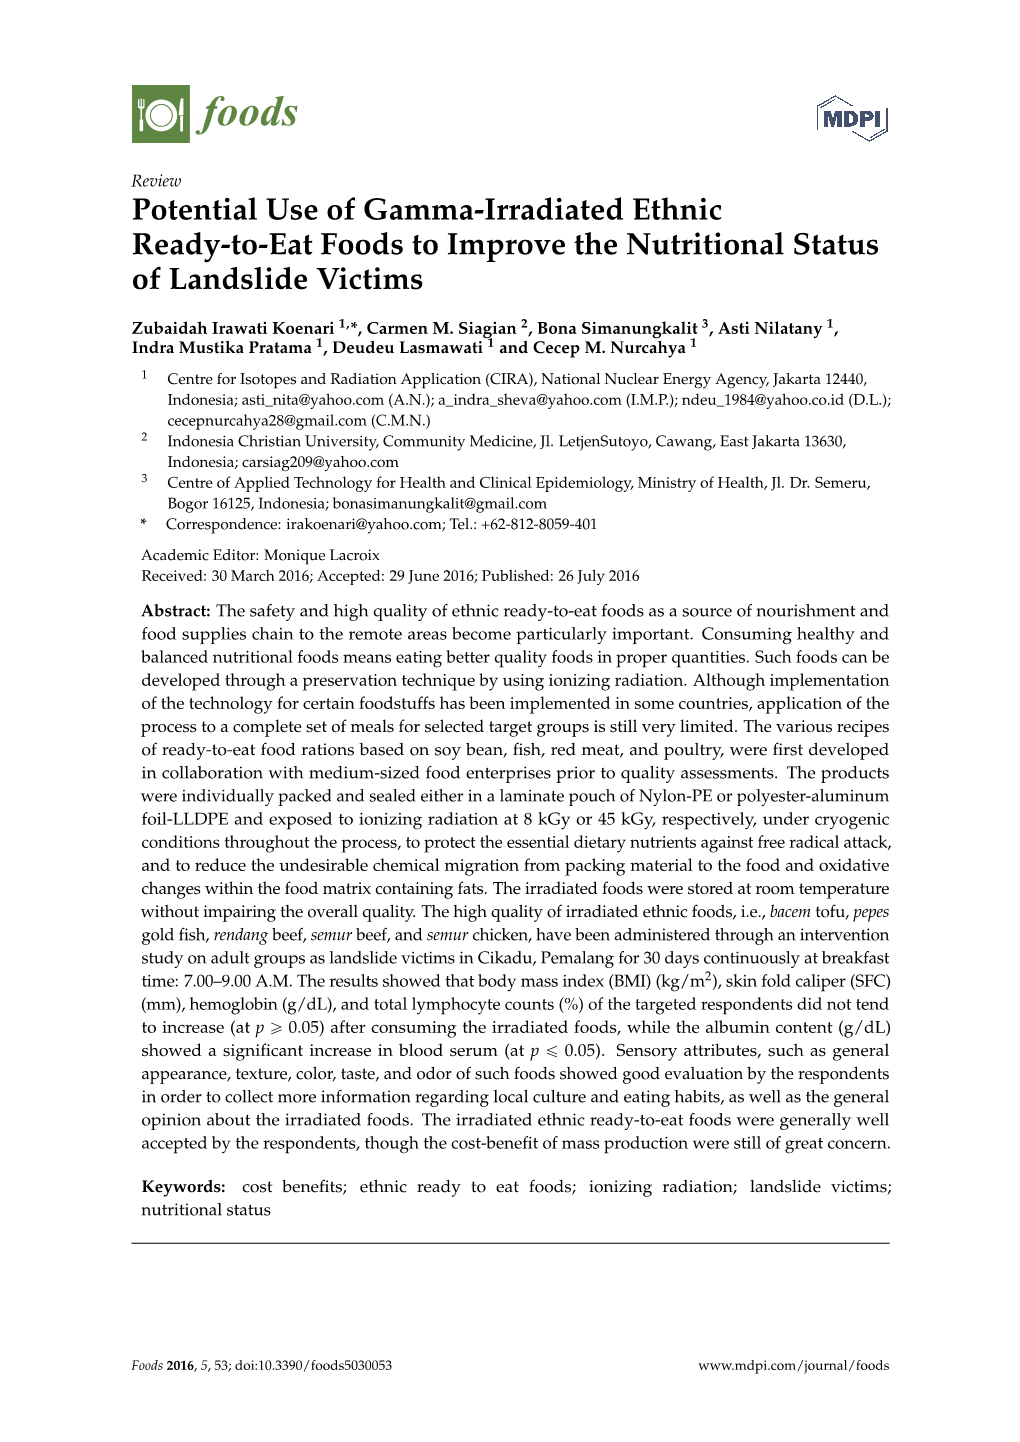 Potential Use of Gamma-Irradiated Ethnic Ready-To-Eat Foods to Improve the Nutritional Status of Landslide Victims